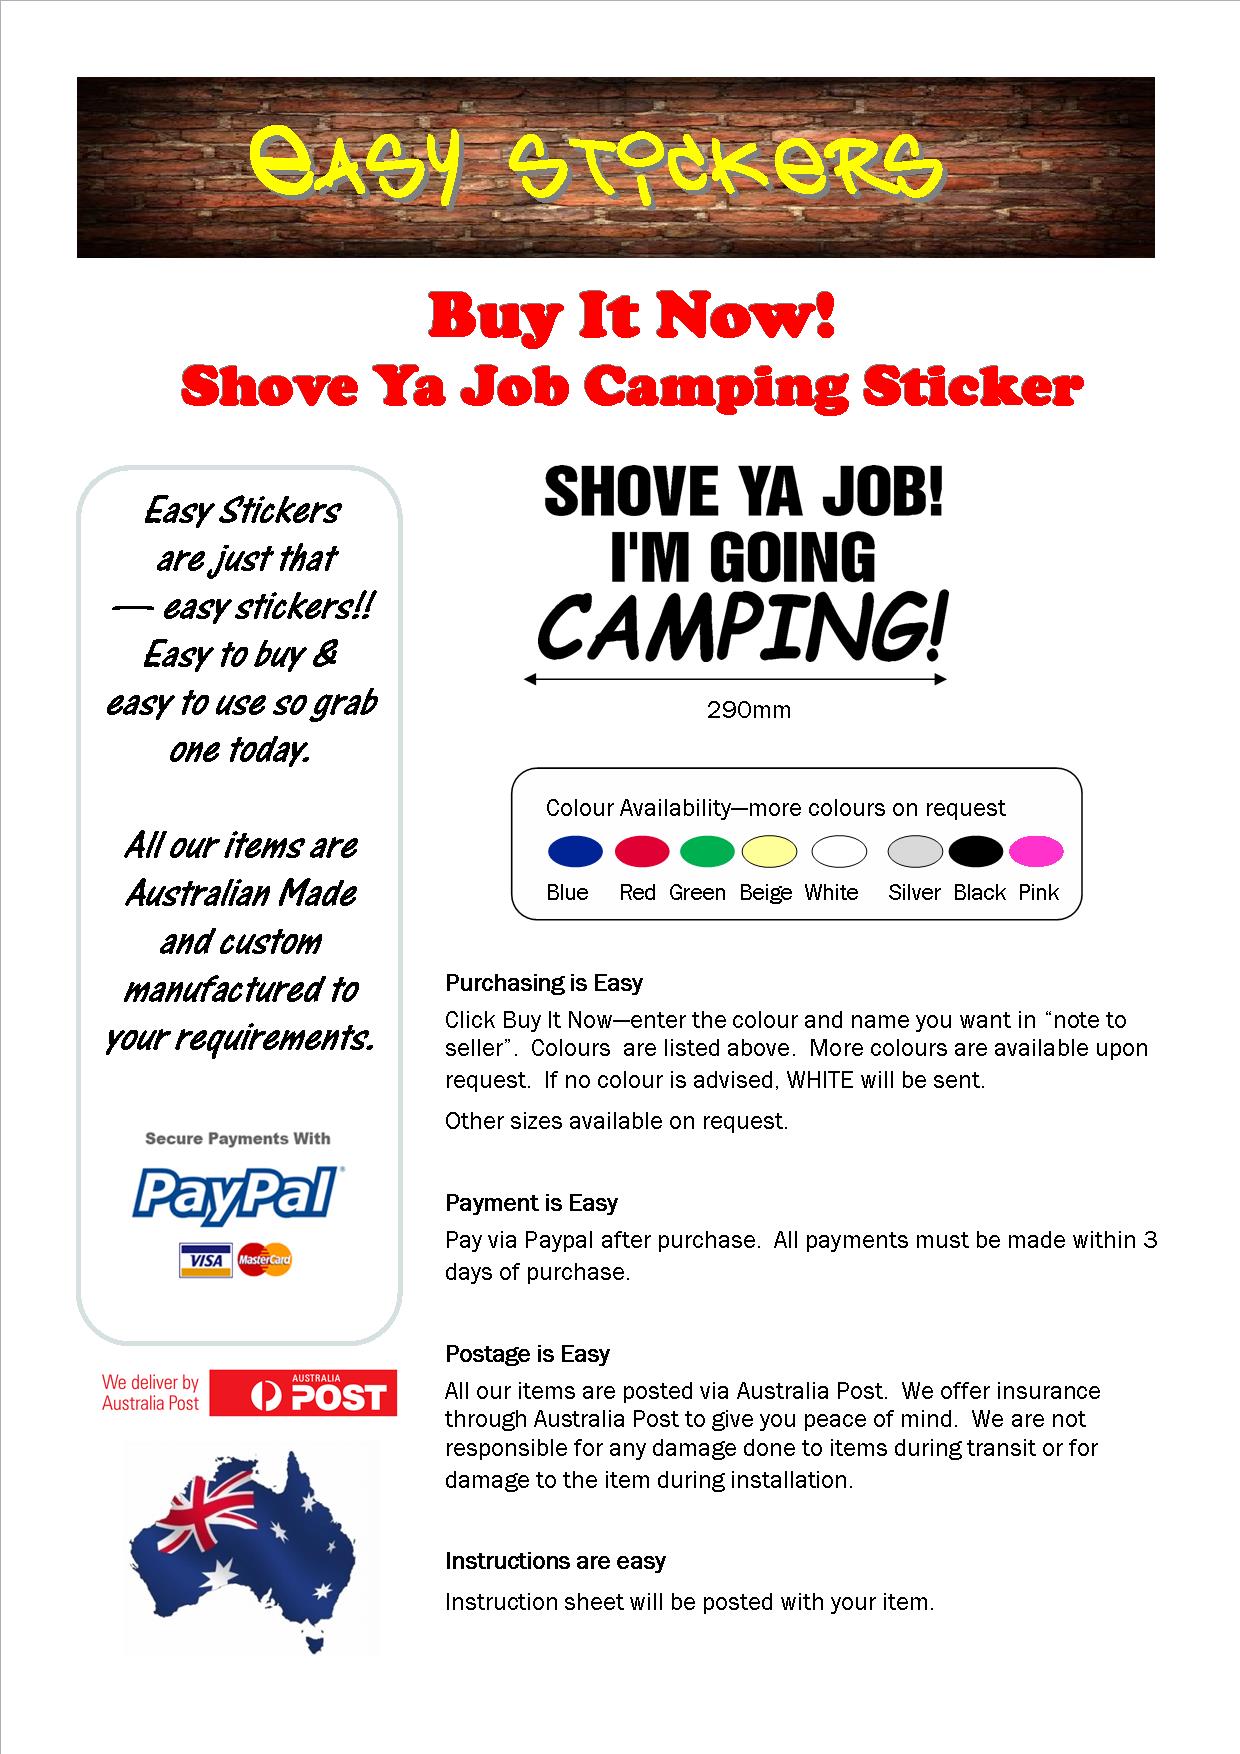 Ebay Template 290mm Shove Job Camping.jpg  by easystickers